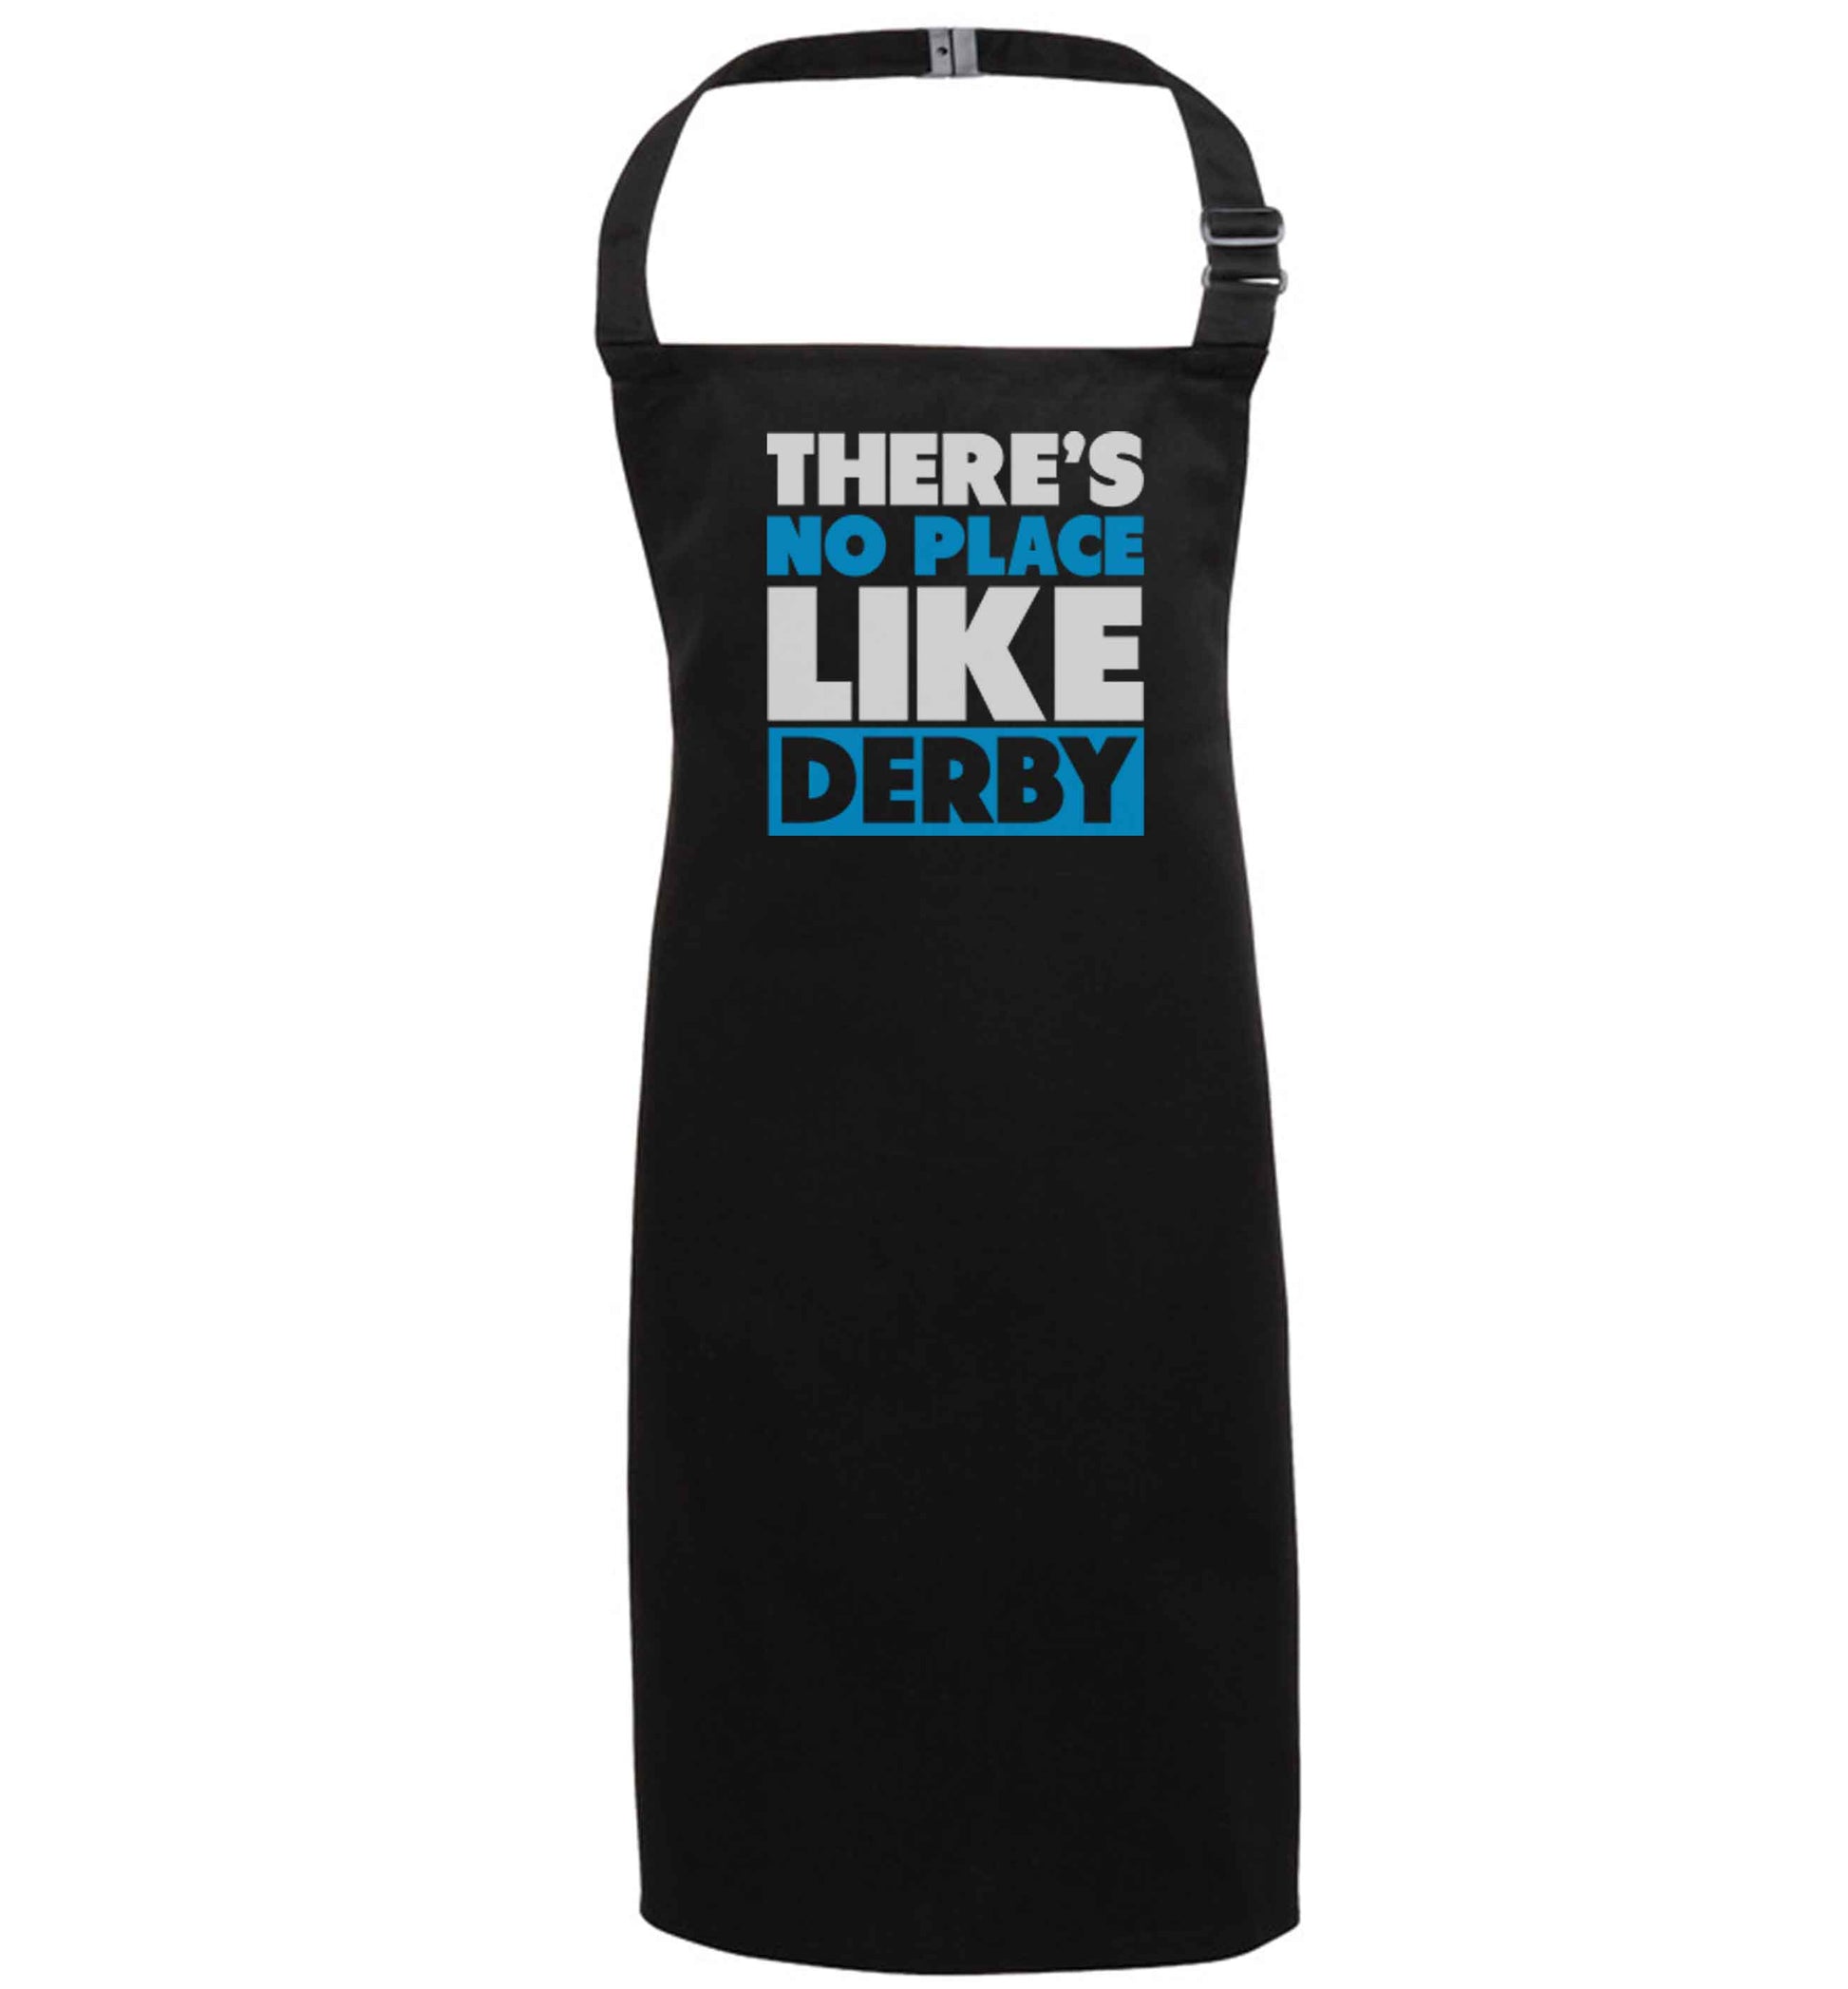 There's no place like Derby black apron 7-10 years